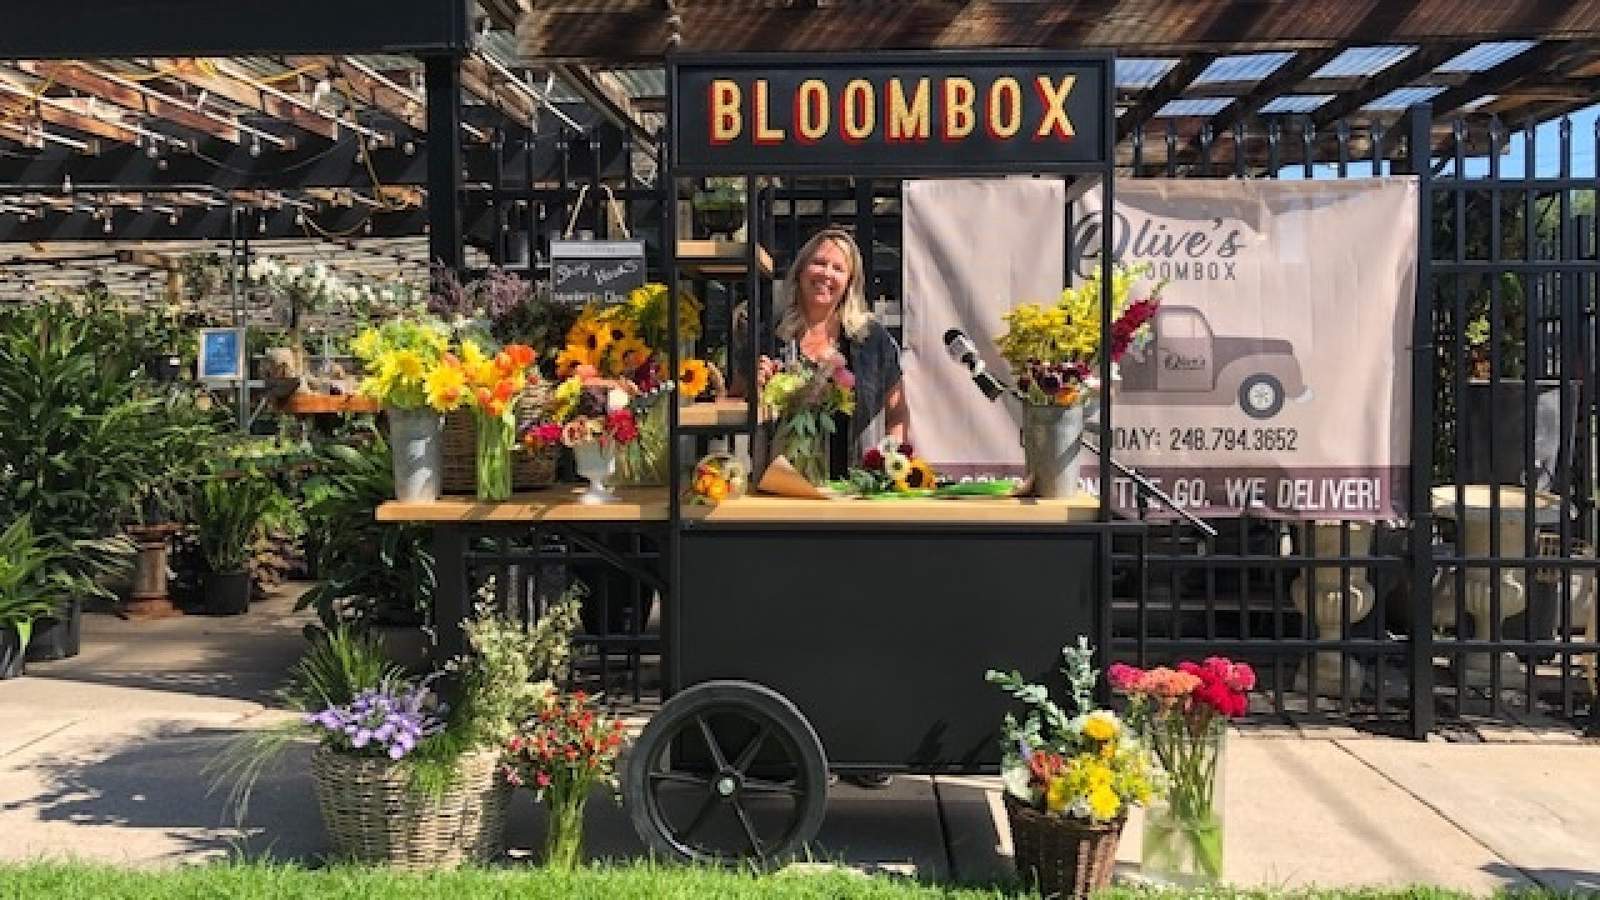 Let Olives Bloombox bring a cart filled with colorful flowers to your home